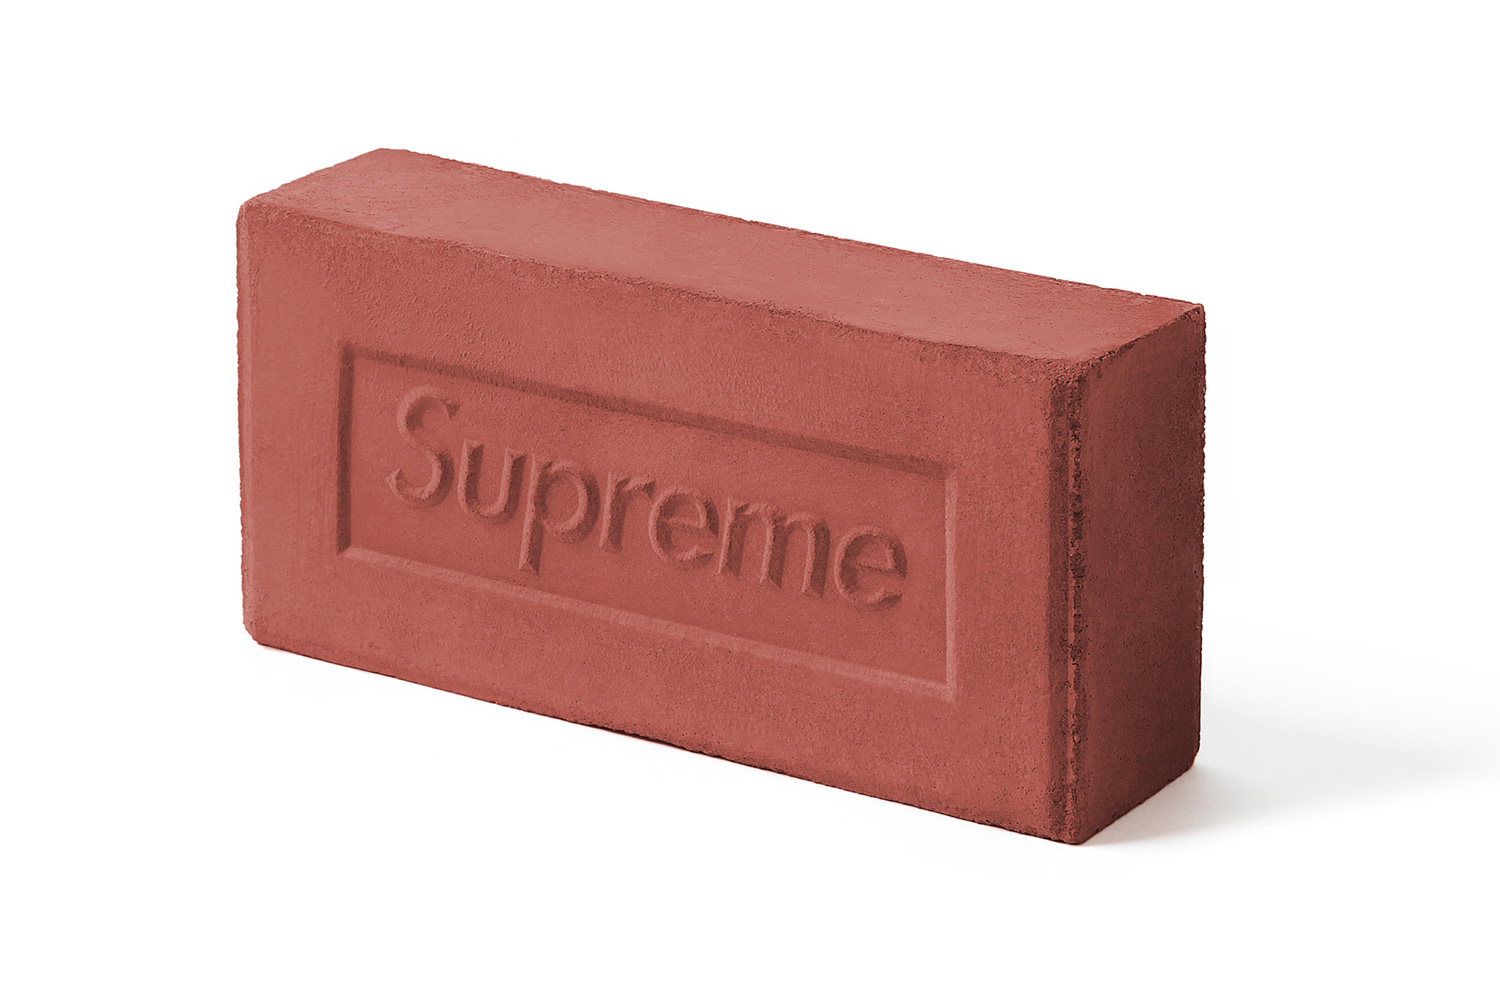 Supreme's Brick: 8 Reasons They Made It